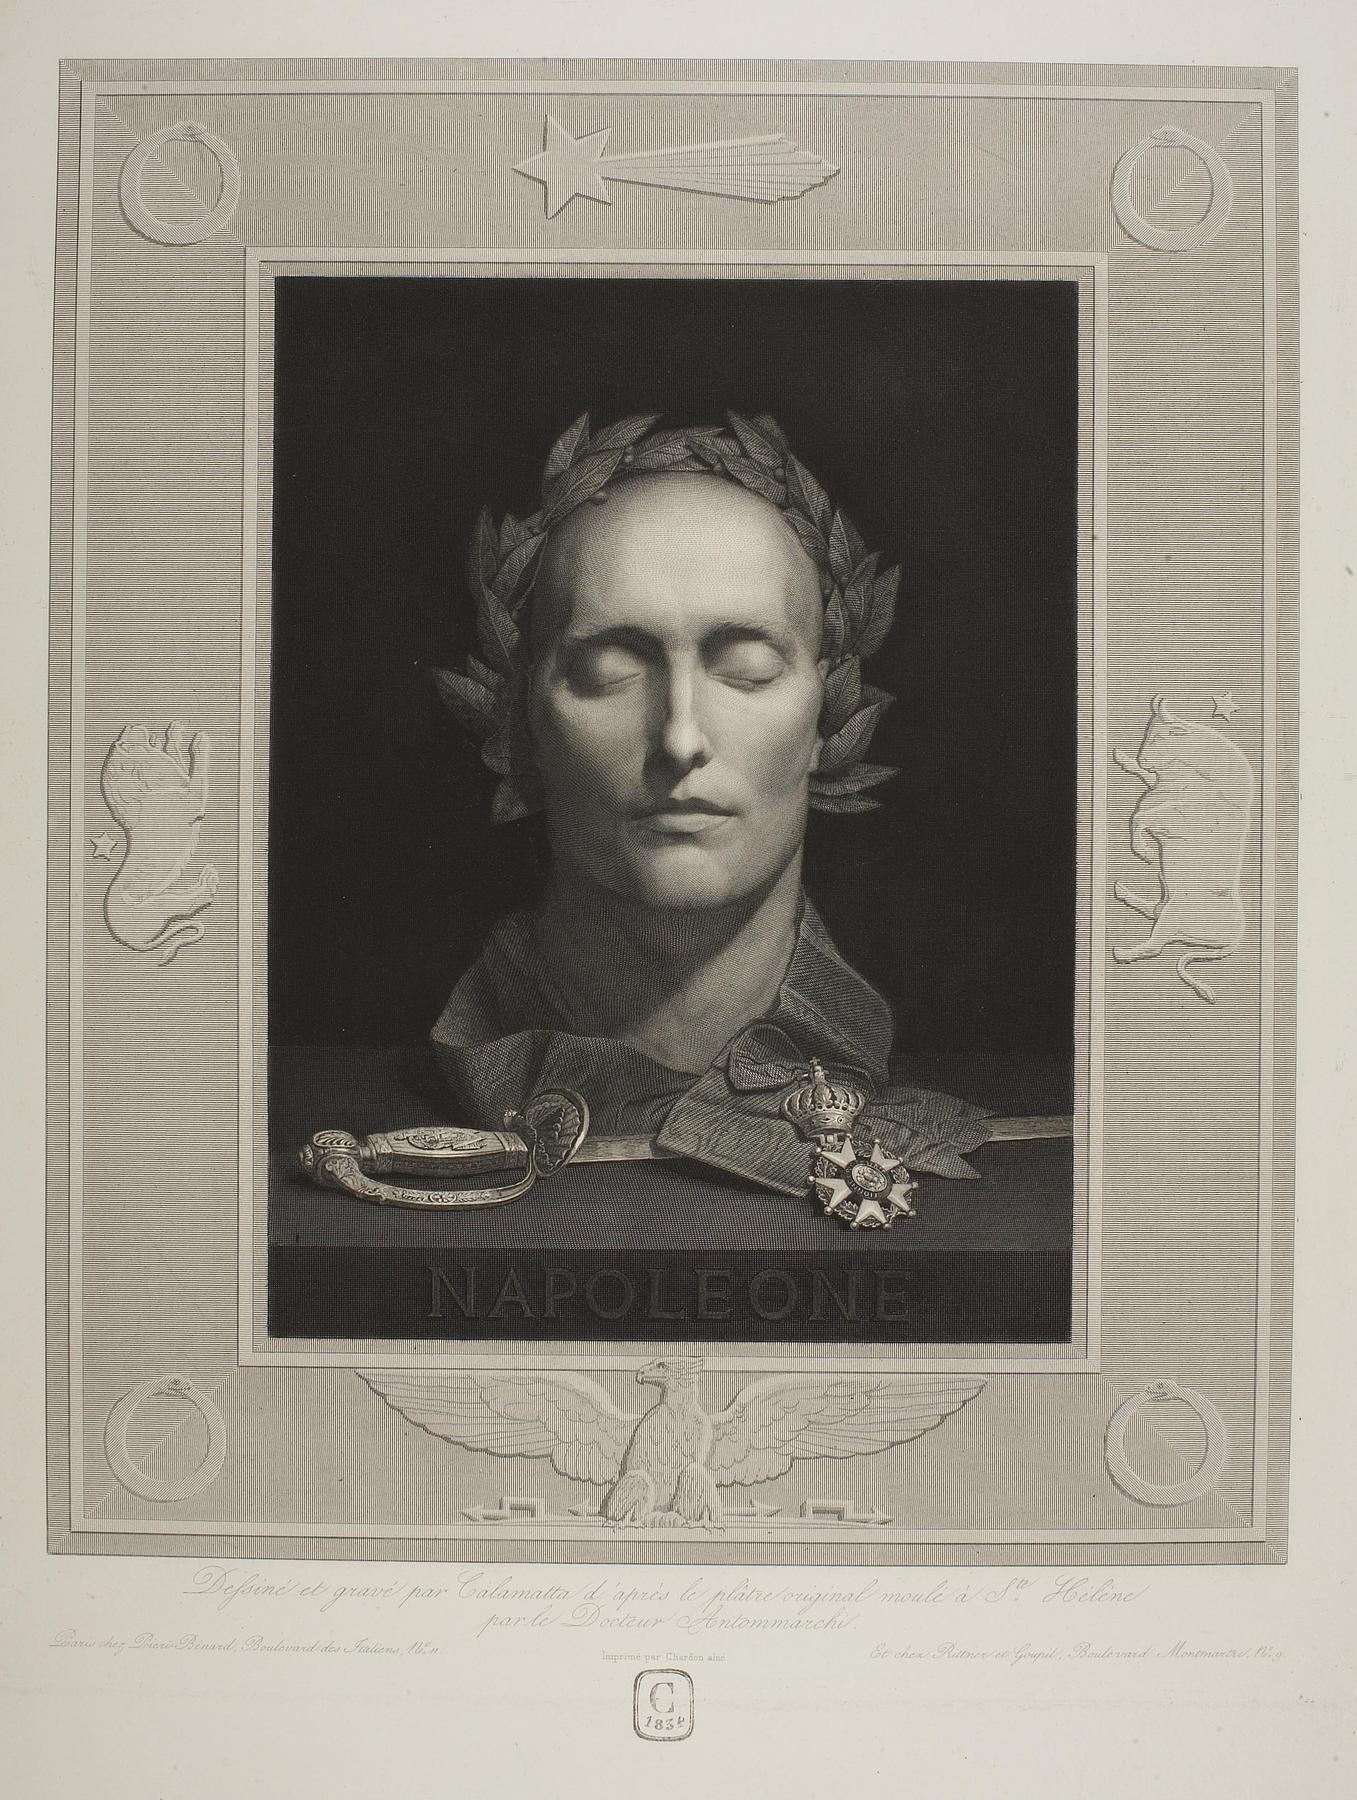 Napoleon Bonaparte's Death Mask with a Laurel Wreath, the Order of the Legion of Honor and a Sword, E401